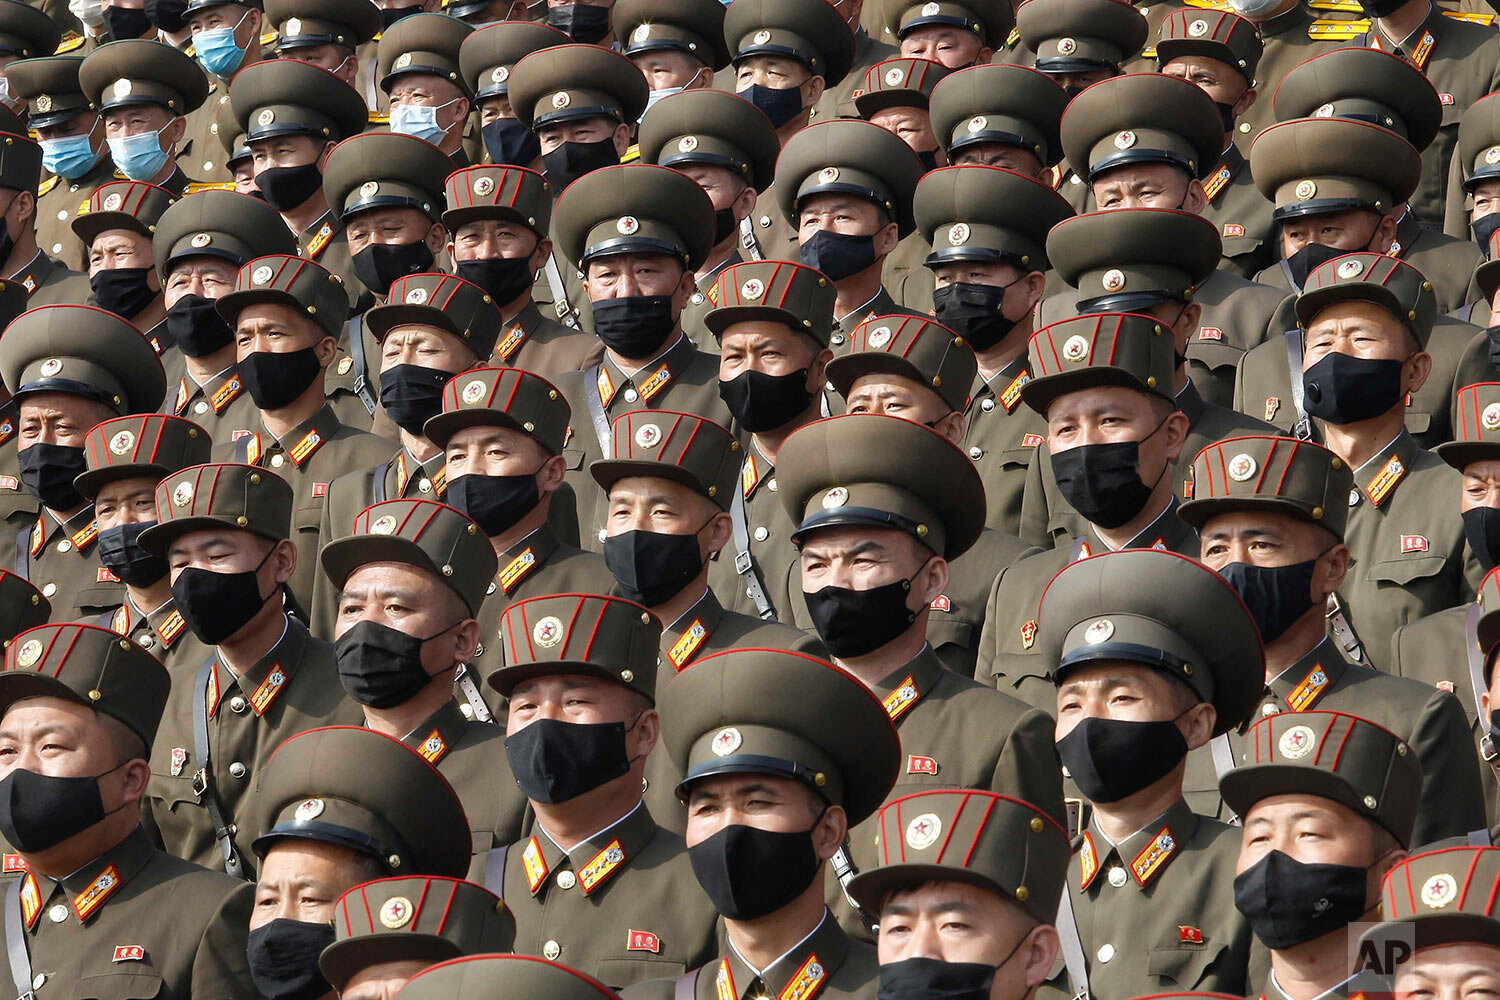  Soldiers wearing face masks to help curb the spread of the coronavirus rally to welcome the 8th Congress of the Workers' Party of Korea at Kim Il Sung Square in Pyongyang, North Korea, Monday, Oct. 12, 2020. (AP Photo/Jon Chol Jin) 